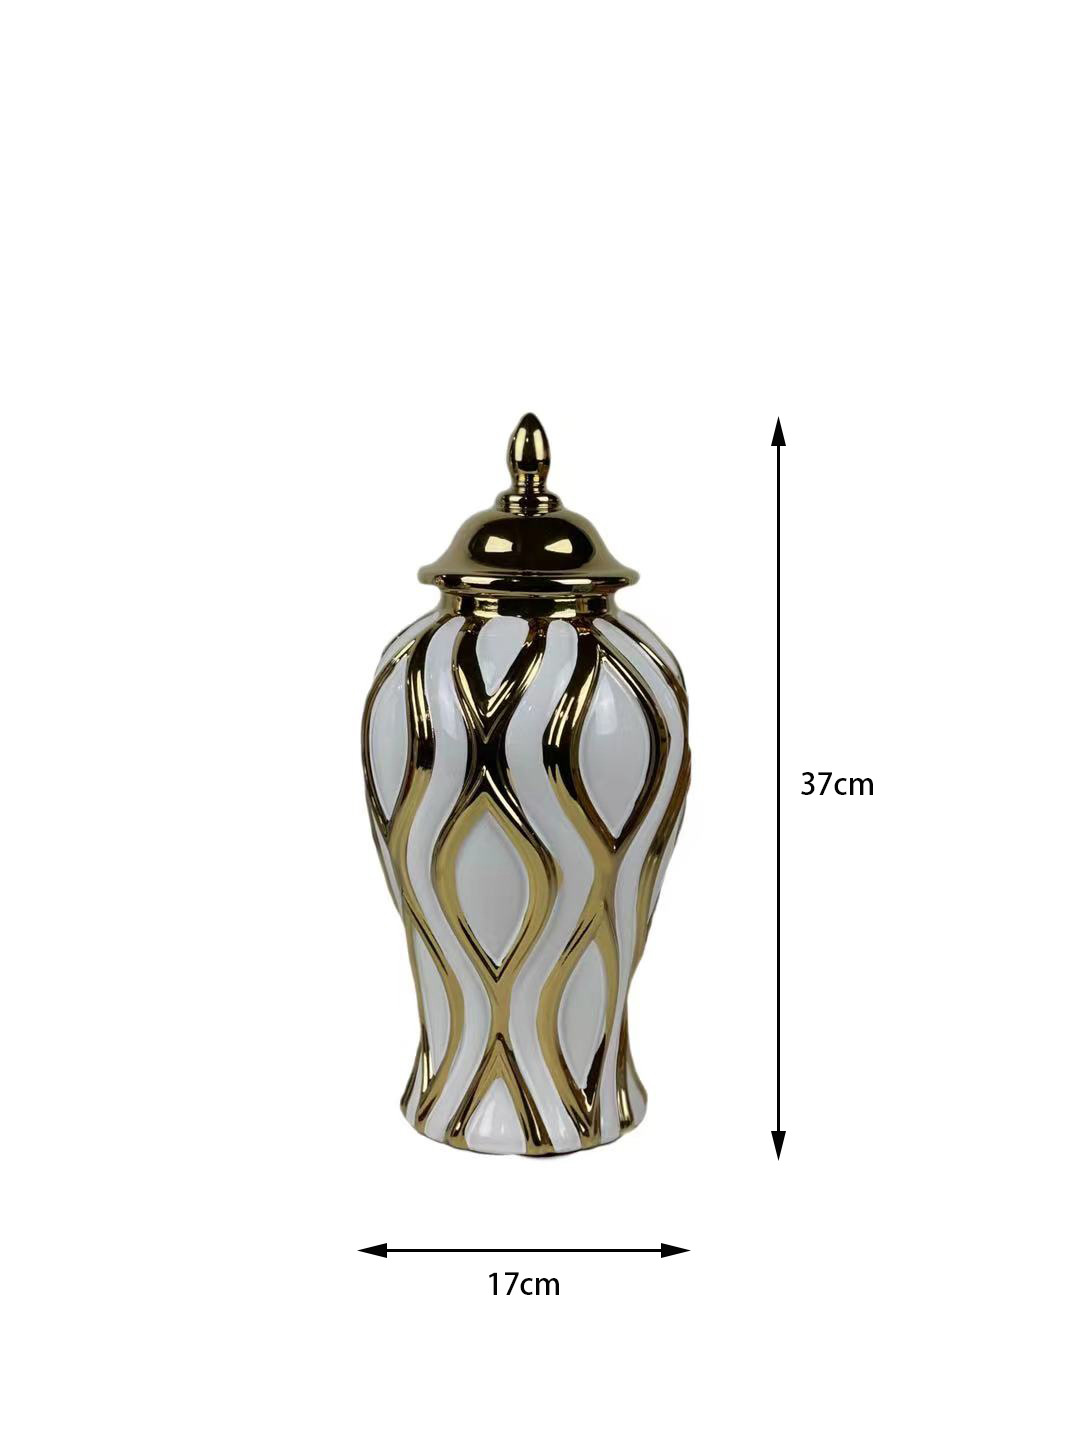 European-Style Electroplated Diamond Double-Spin Electroplated Ceramic Stripes Temple Jar Model Room Living Room and Hotel Black Gold Platinum Vase